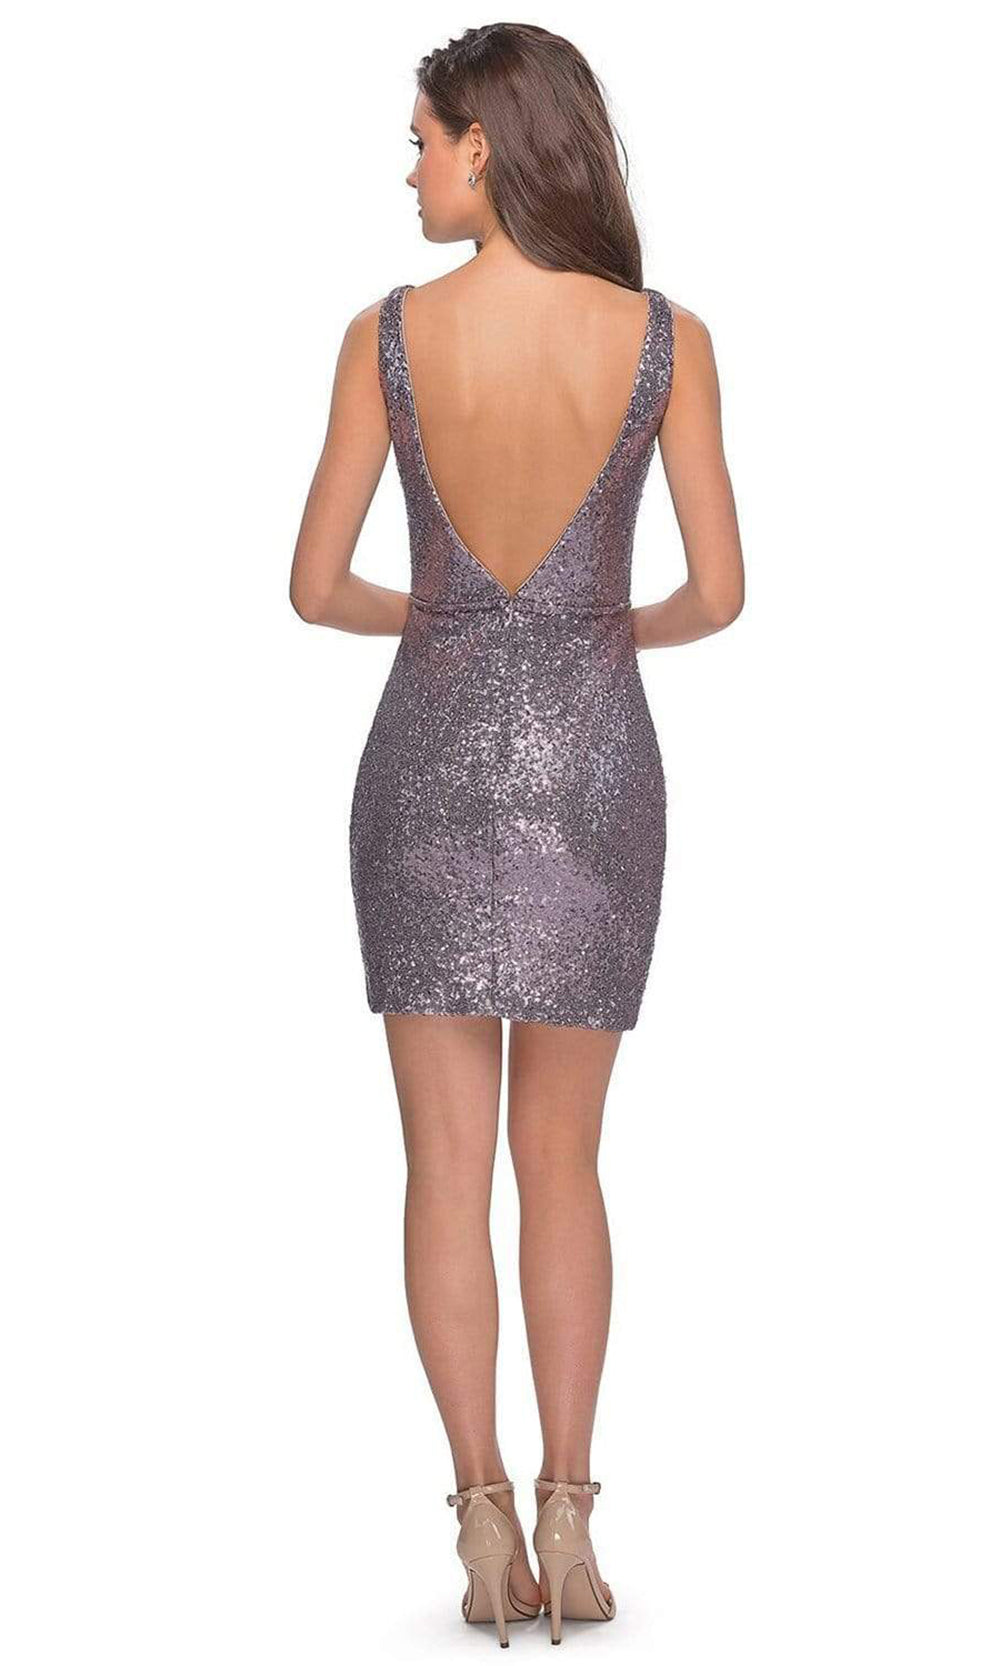 La Femme - Plunging V-Neck Sequined Metallic Faux Wrap Dress 28218 - 1 pc Rose Gold in Size 4 Available CCSALE 4 / Dark Silver